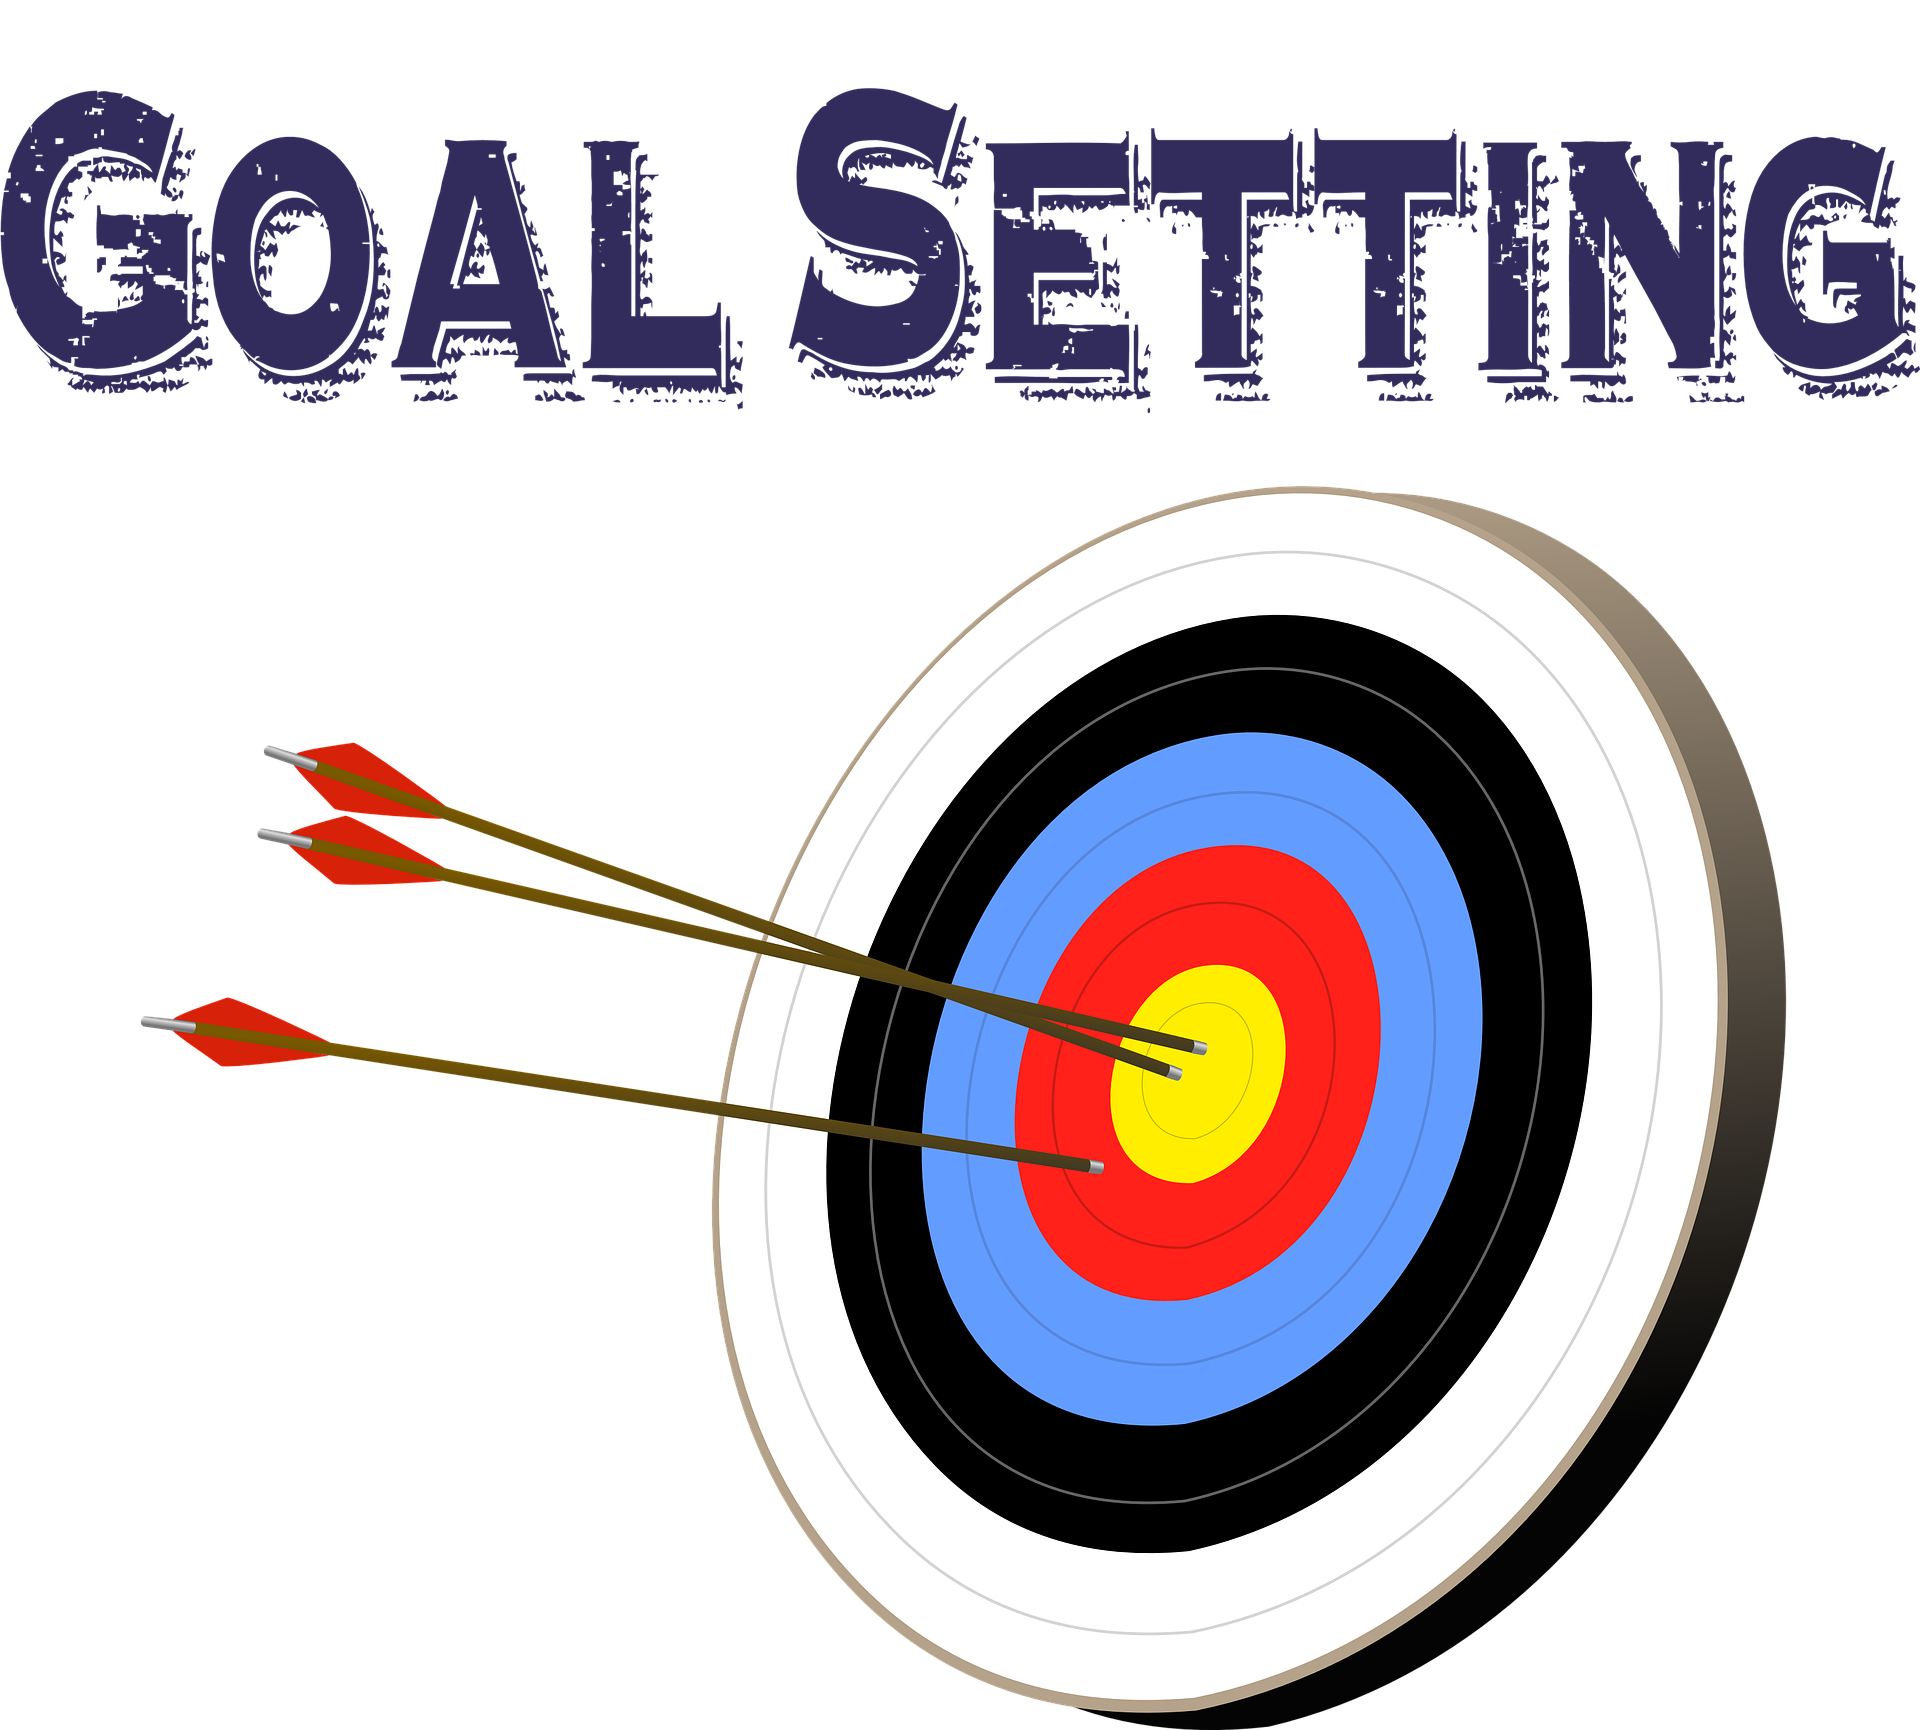 Considerations for Goal Setting